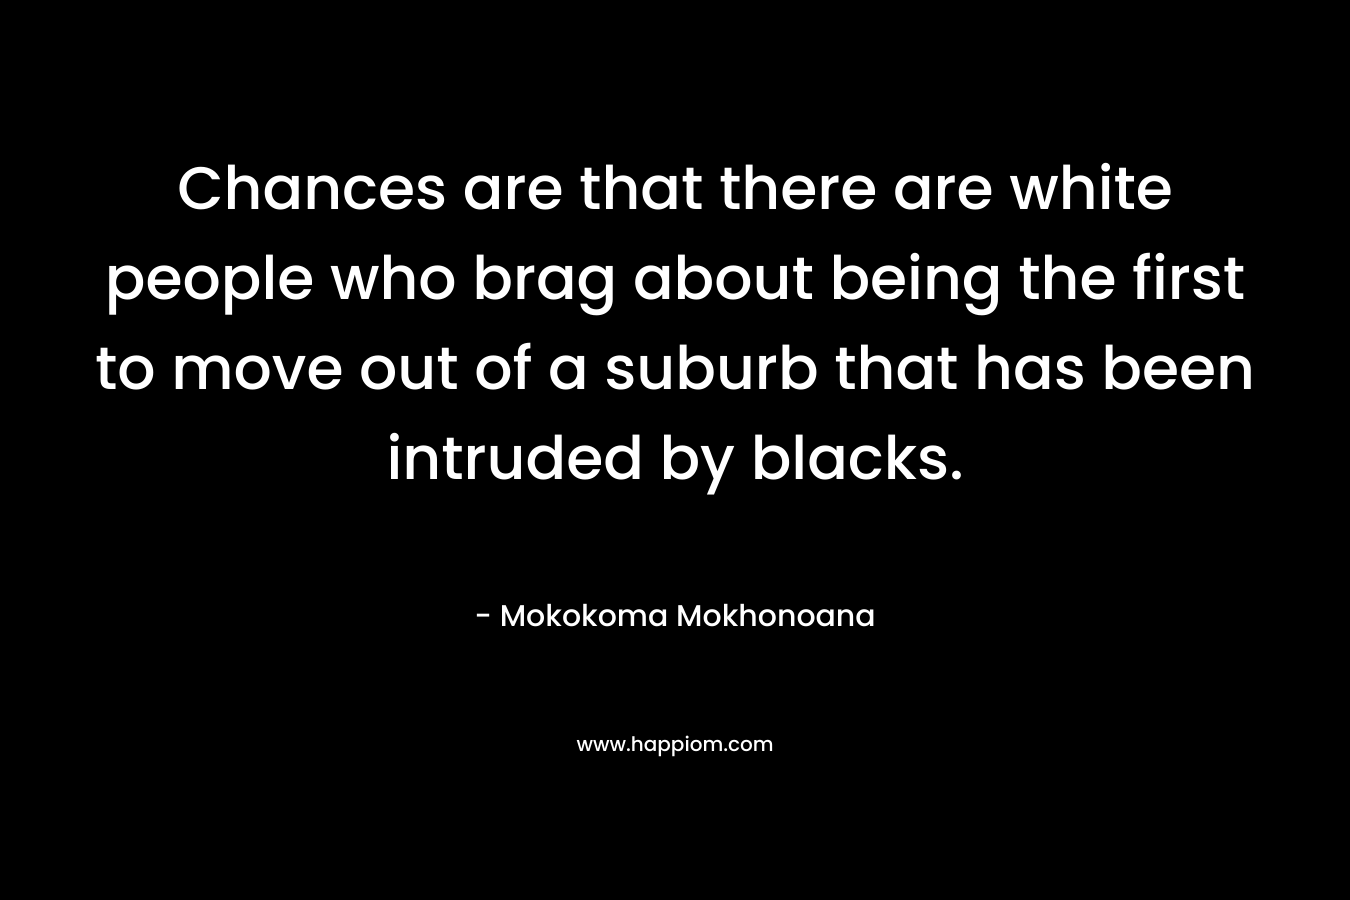 Chances are that there are white people who brag about being the first to move out of a suburb that has been intruded by blacks. – Mokokoma Mokhonoana